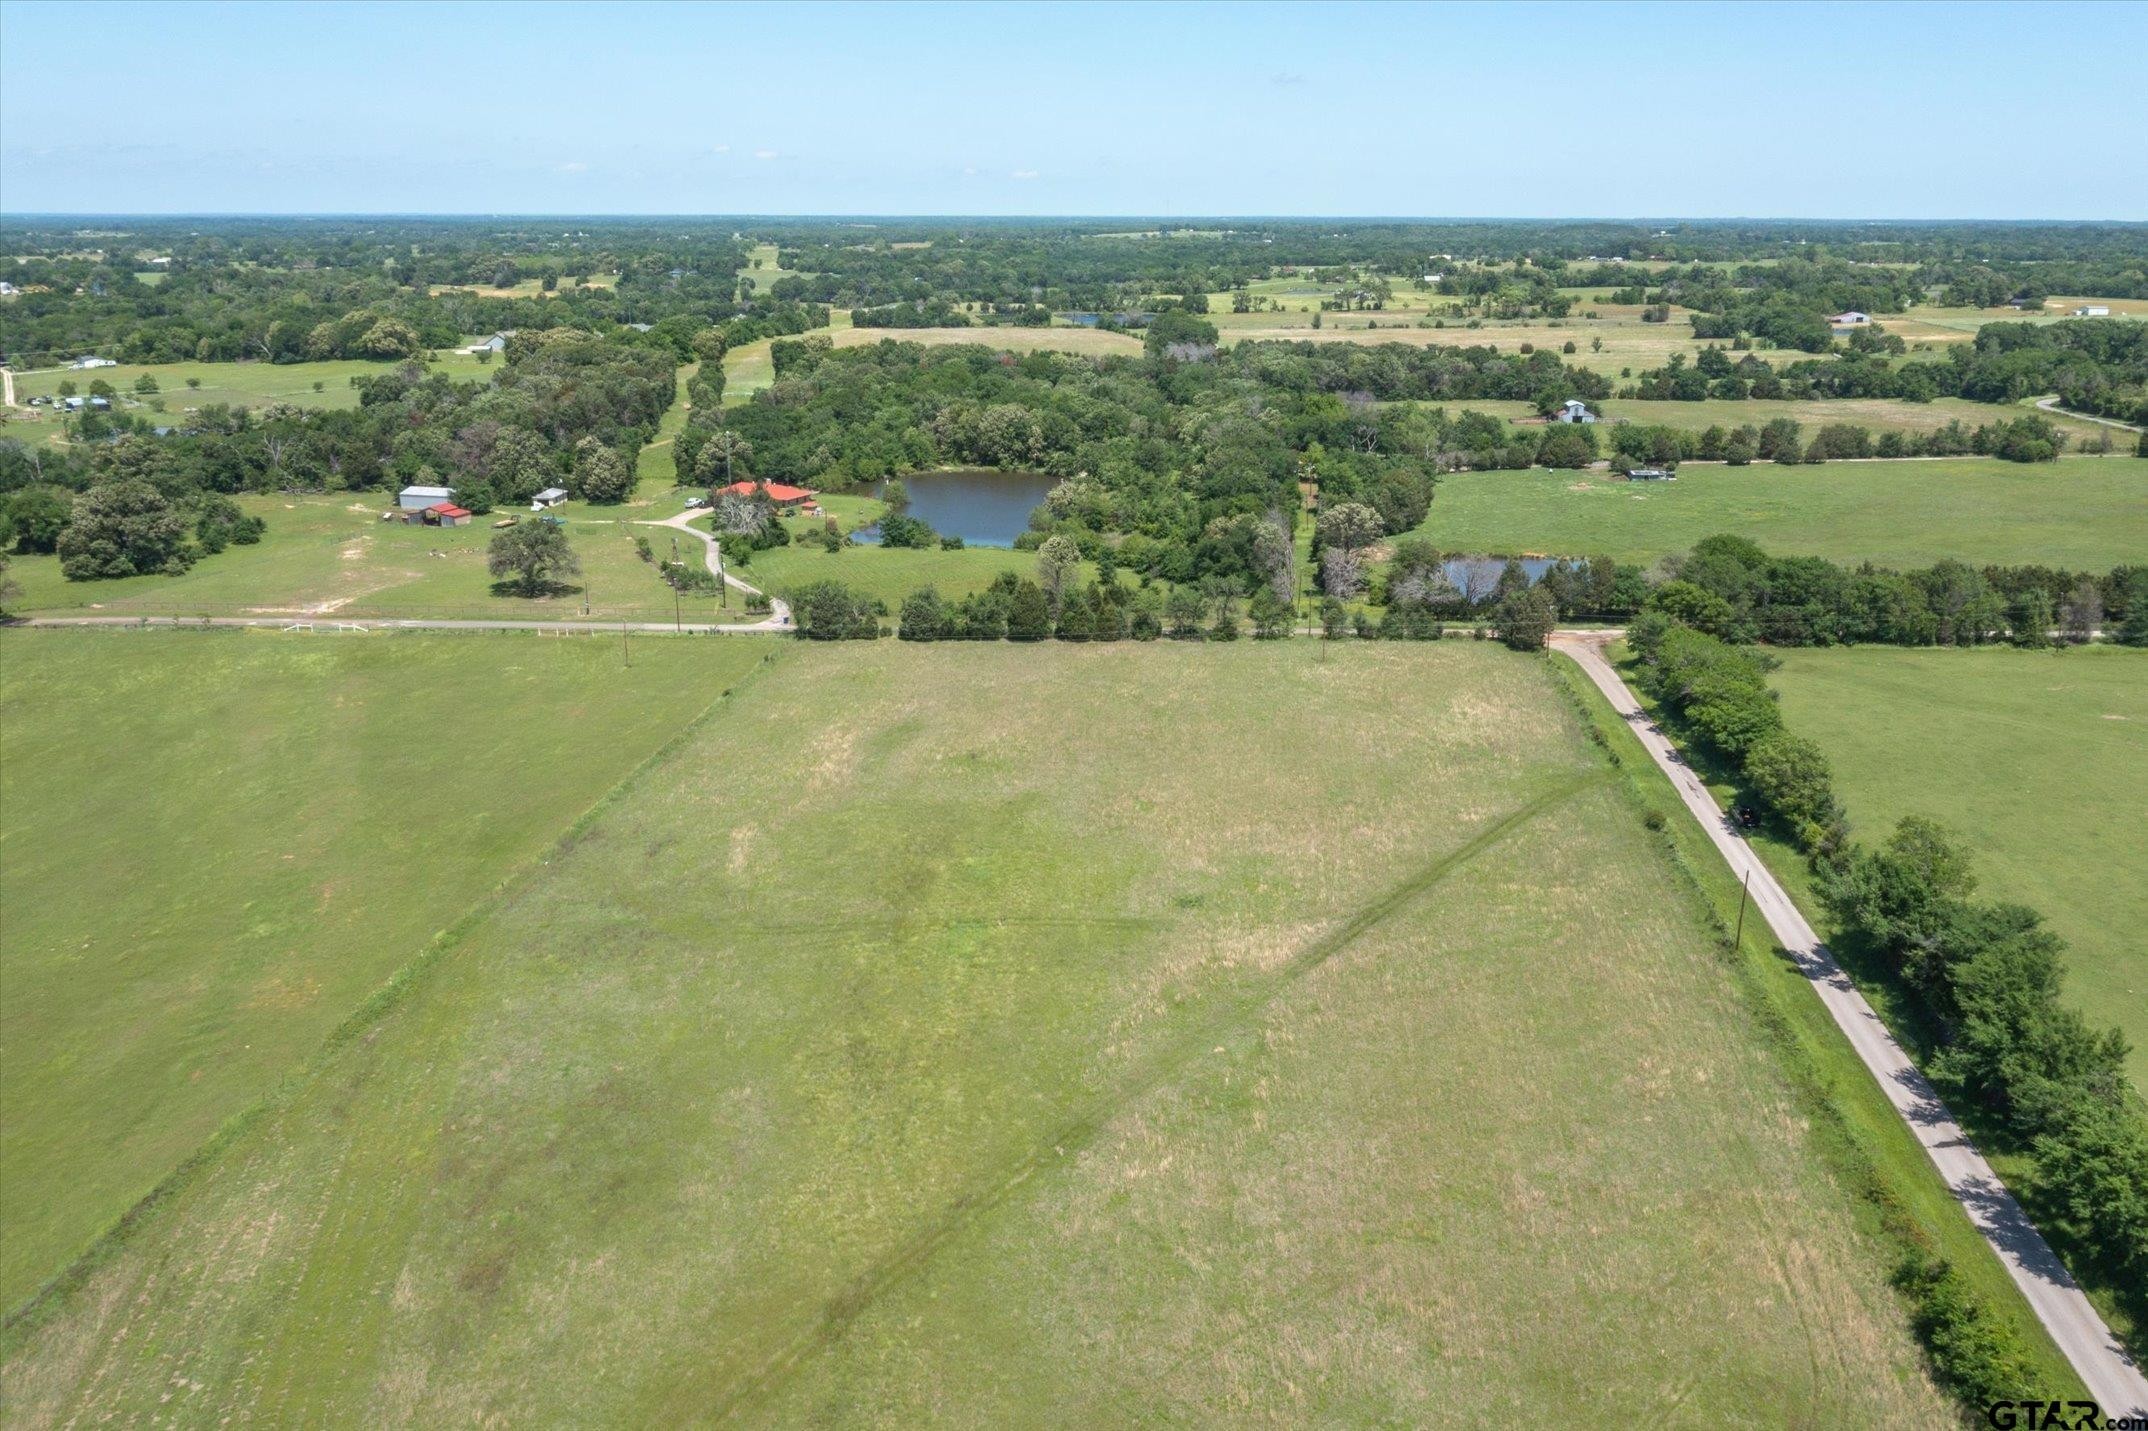 14. Tbd Lot 2 (Canton Isd) Vz County Road 2311